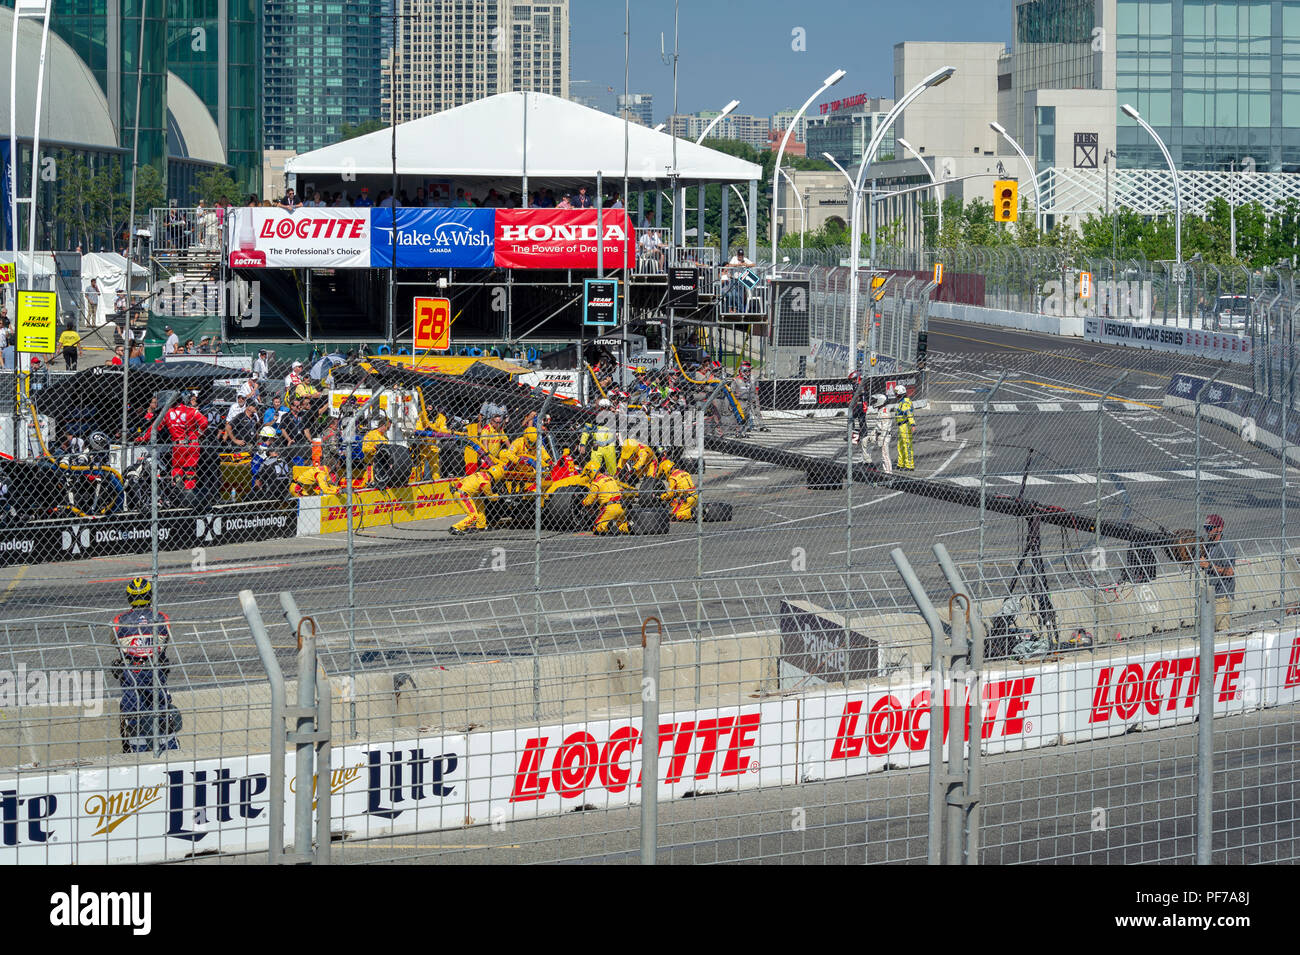 Indy car race day in Toronto Stock Photo